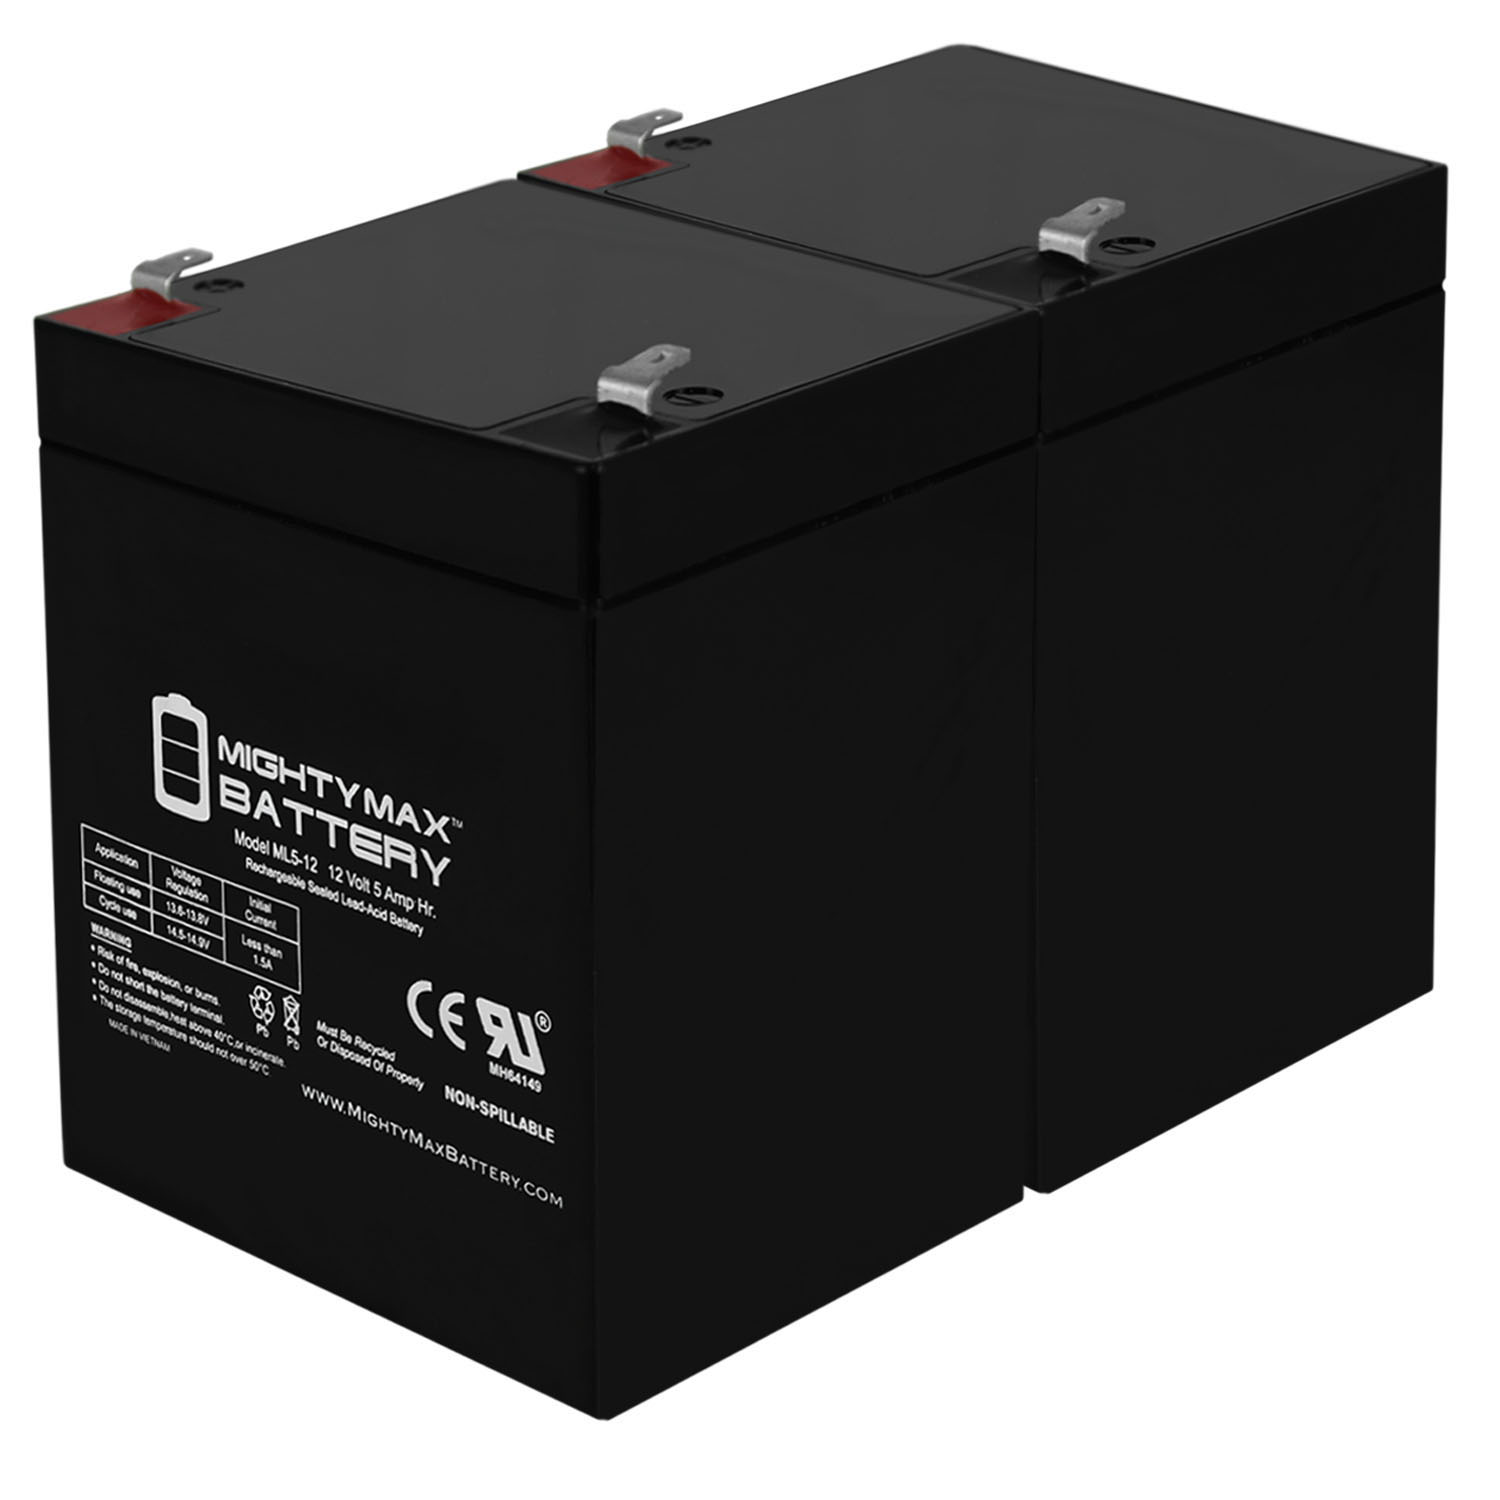 12V 5AH SLA Replacement Battery for Lintronics MX12040 - 2 Pack